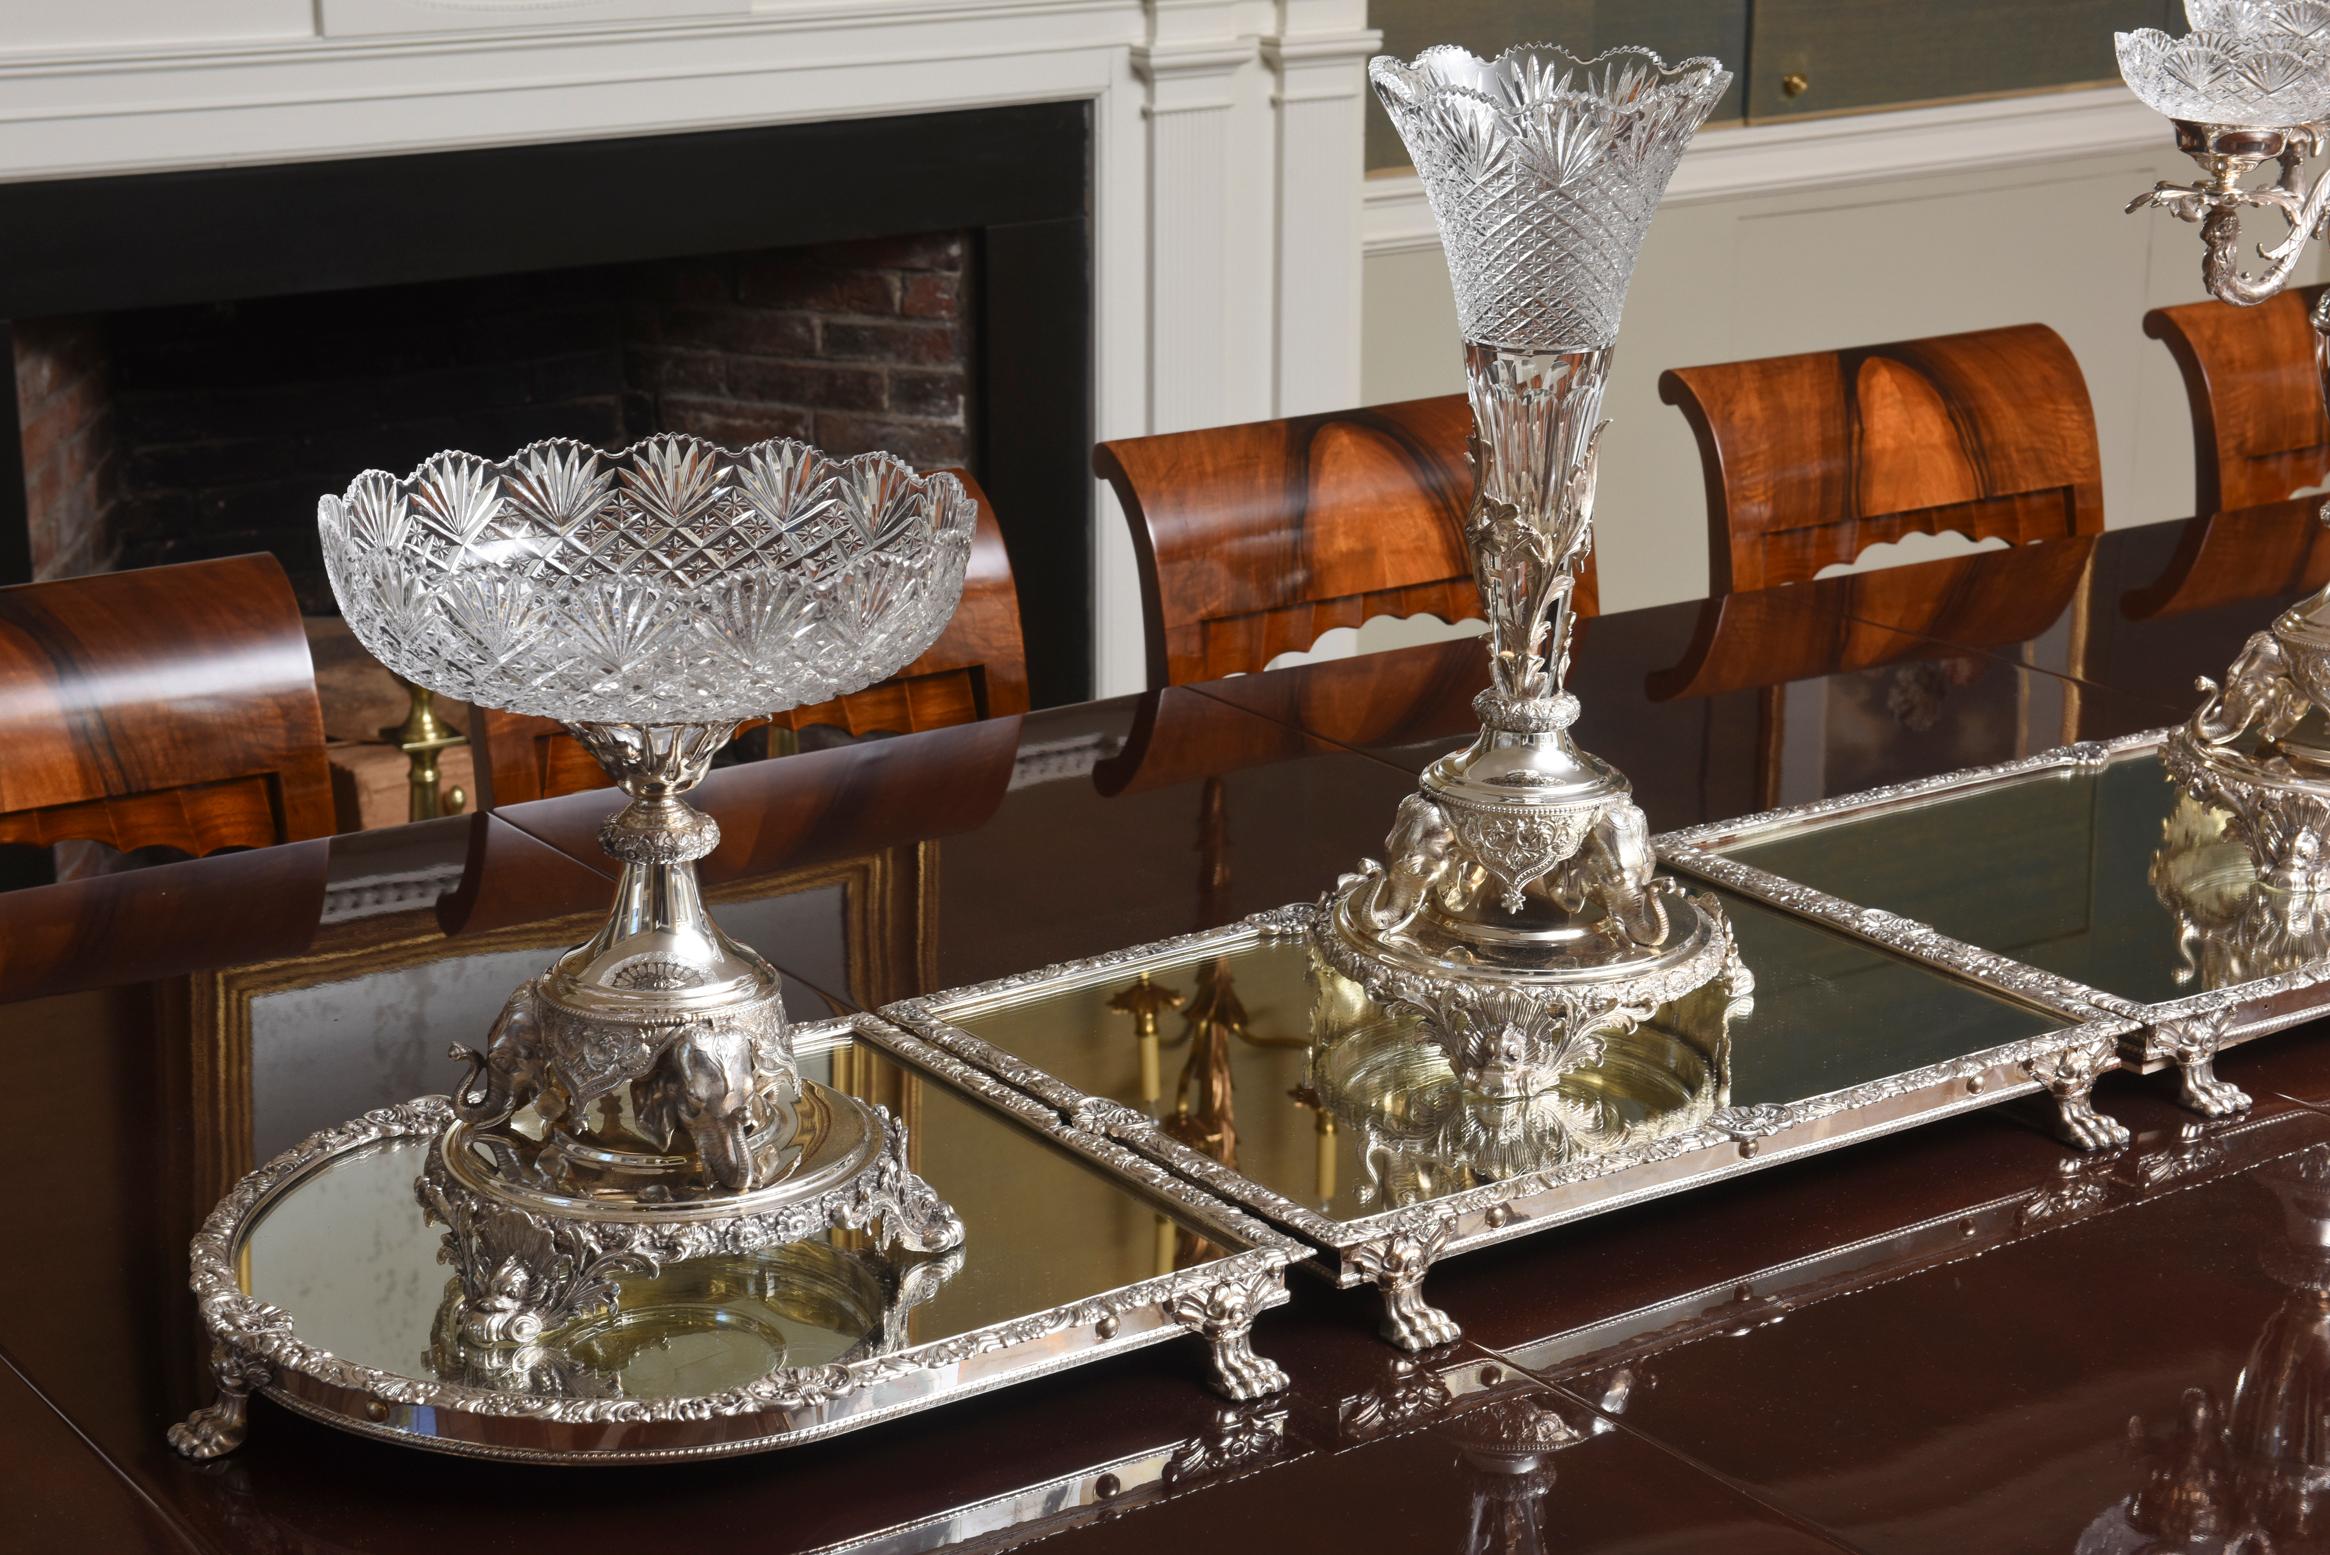 Hand-Crafted Monumental English Silver Plate & Crystal Centerpiece Ensemble, Elephant Motif